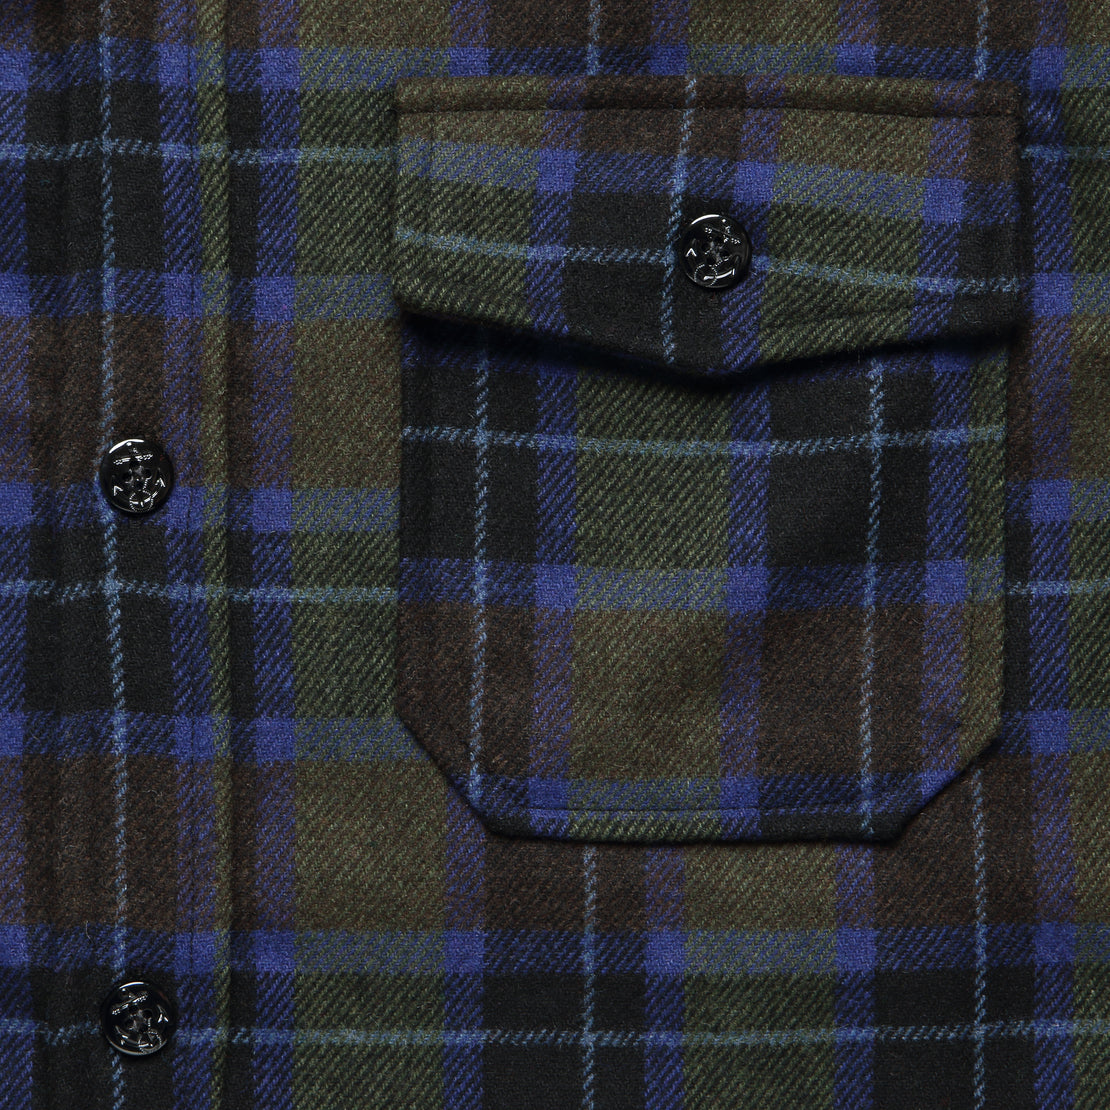 CPO Wool Shirt - Spruce Plaid - Schott - STAG Provisions - Tops - L/S Woven - Overshirt